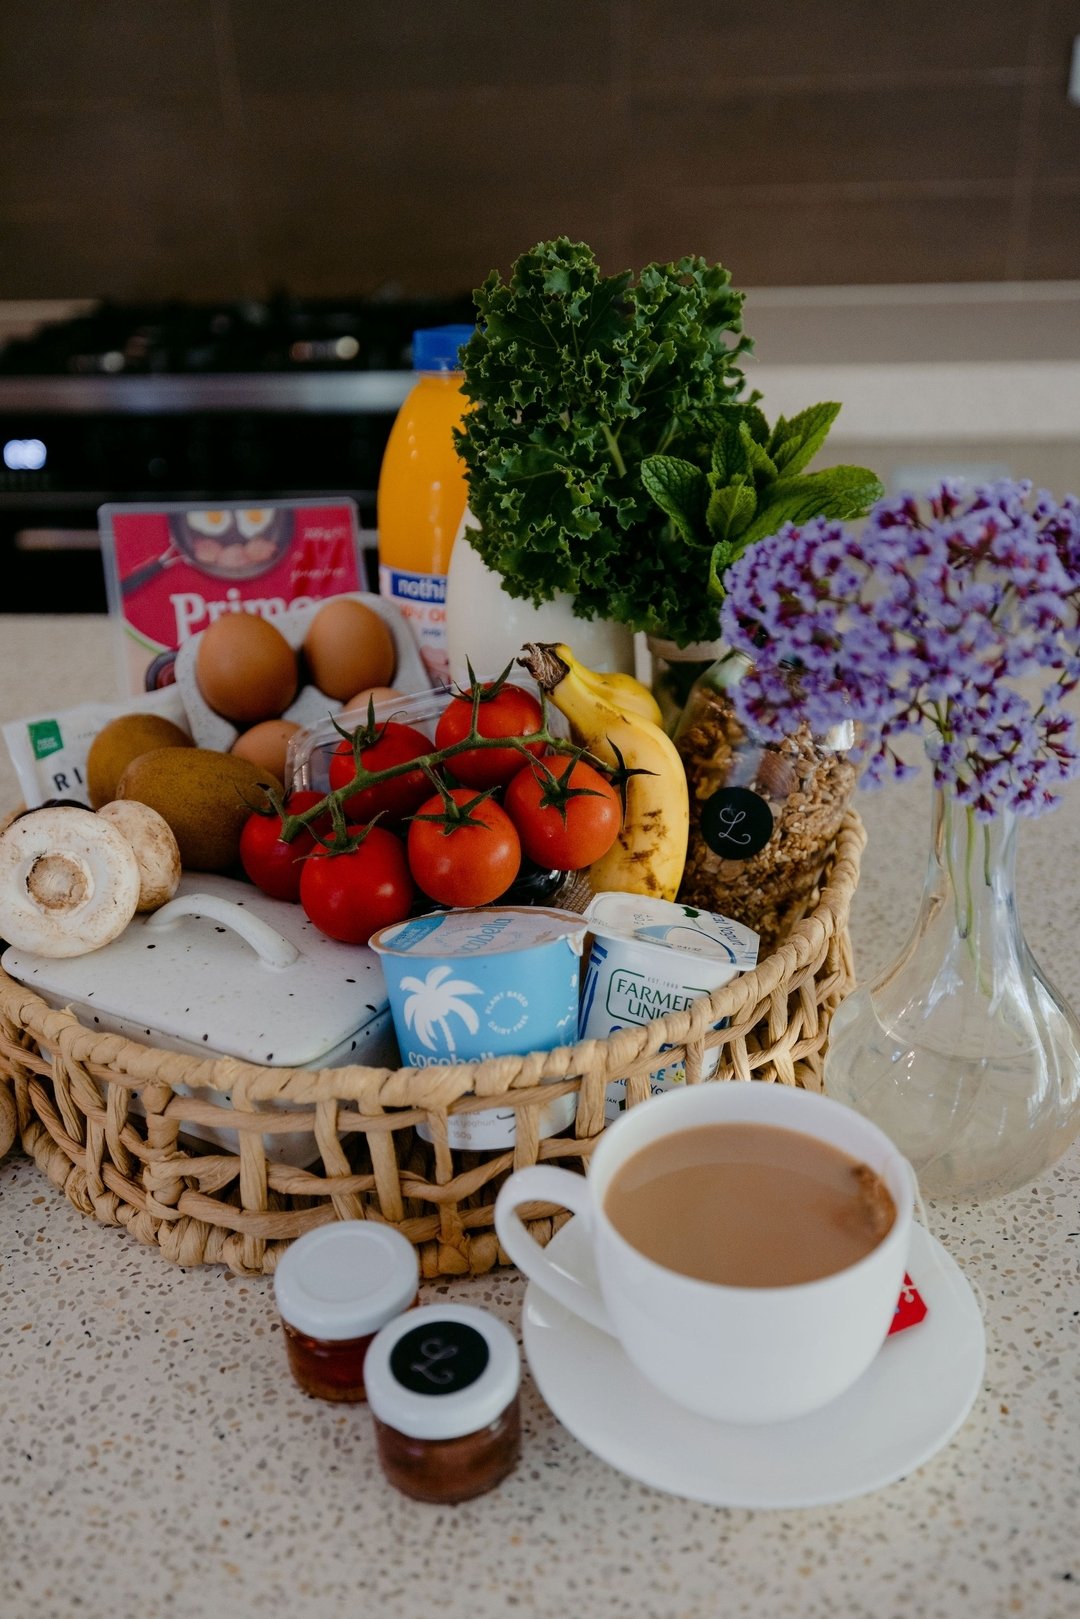 Rise and shine with our gourmet breakfast hamper! 🥐 🍓 Start your morning with a delicious selection of fresh ingredients for the perfect continental and cooked breakfast.

The perfect way to start your day!

#accommodationmargaretriver #margaretriv